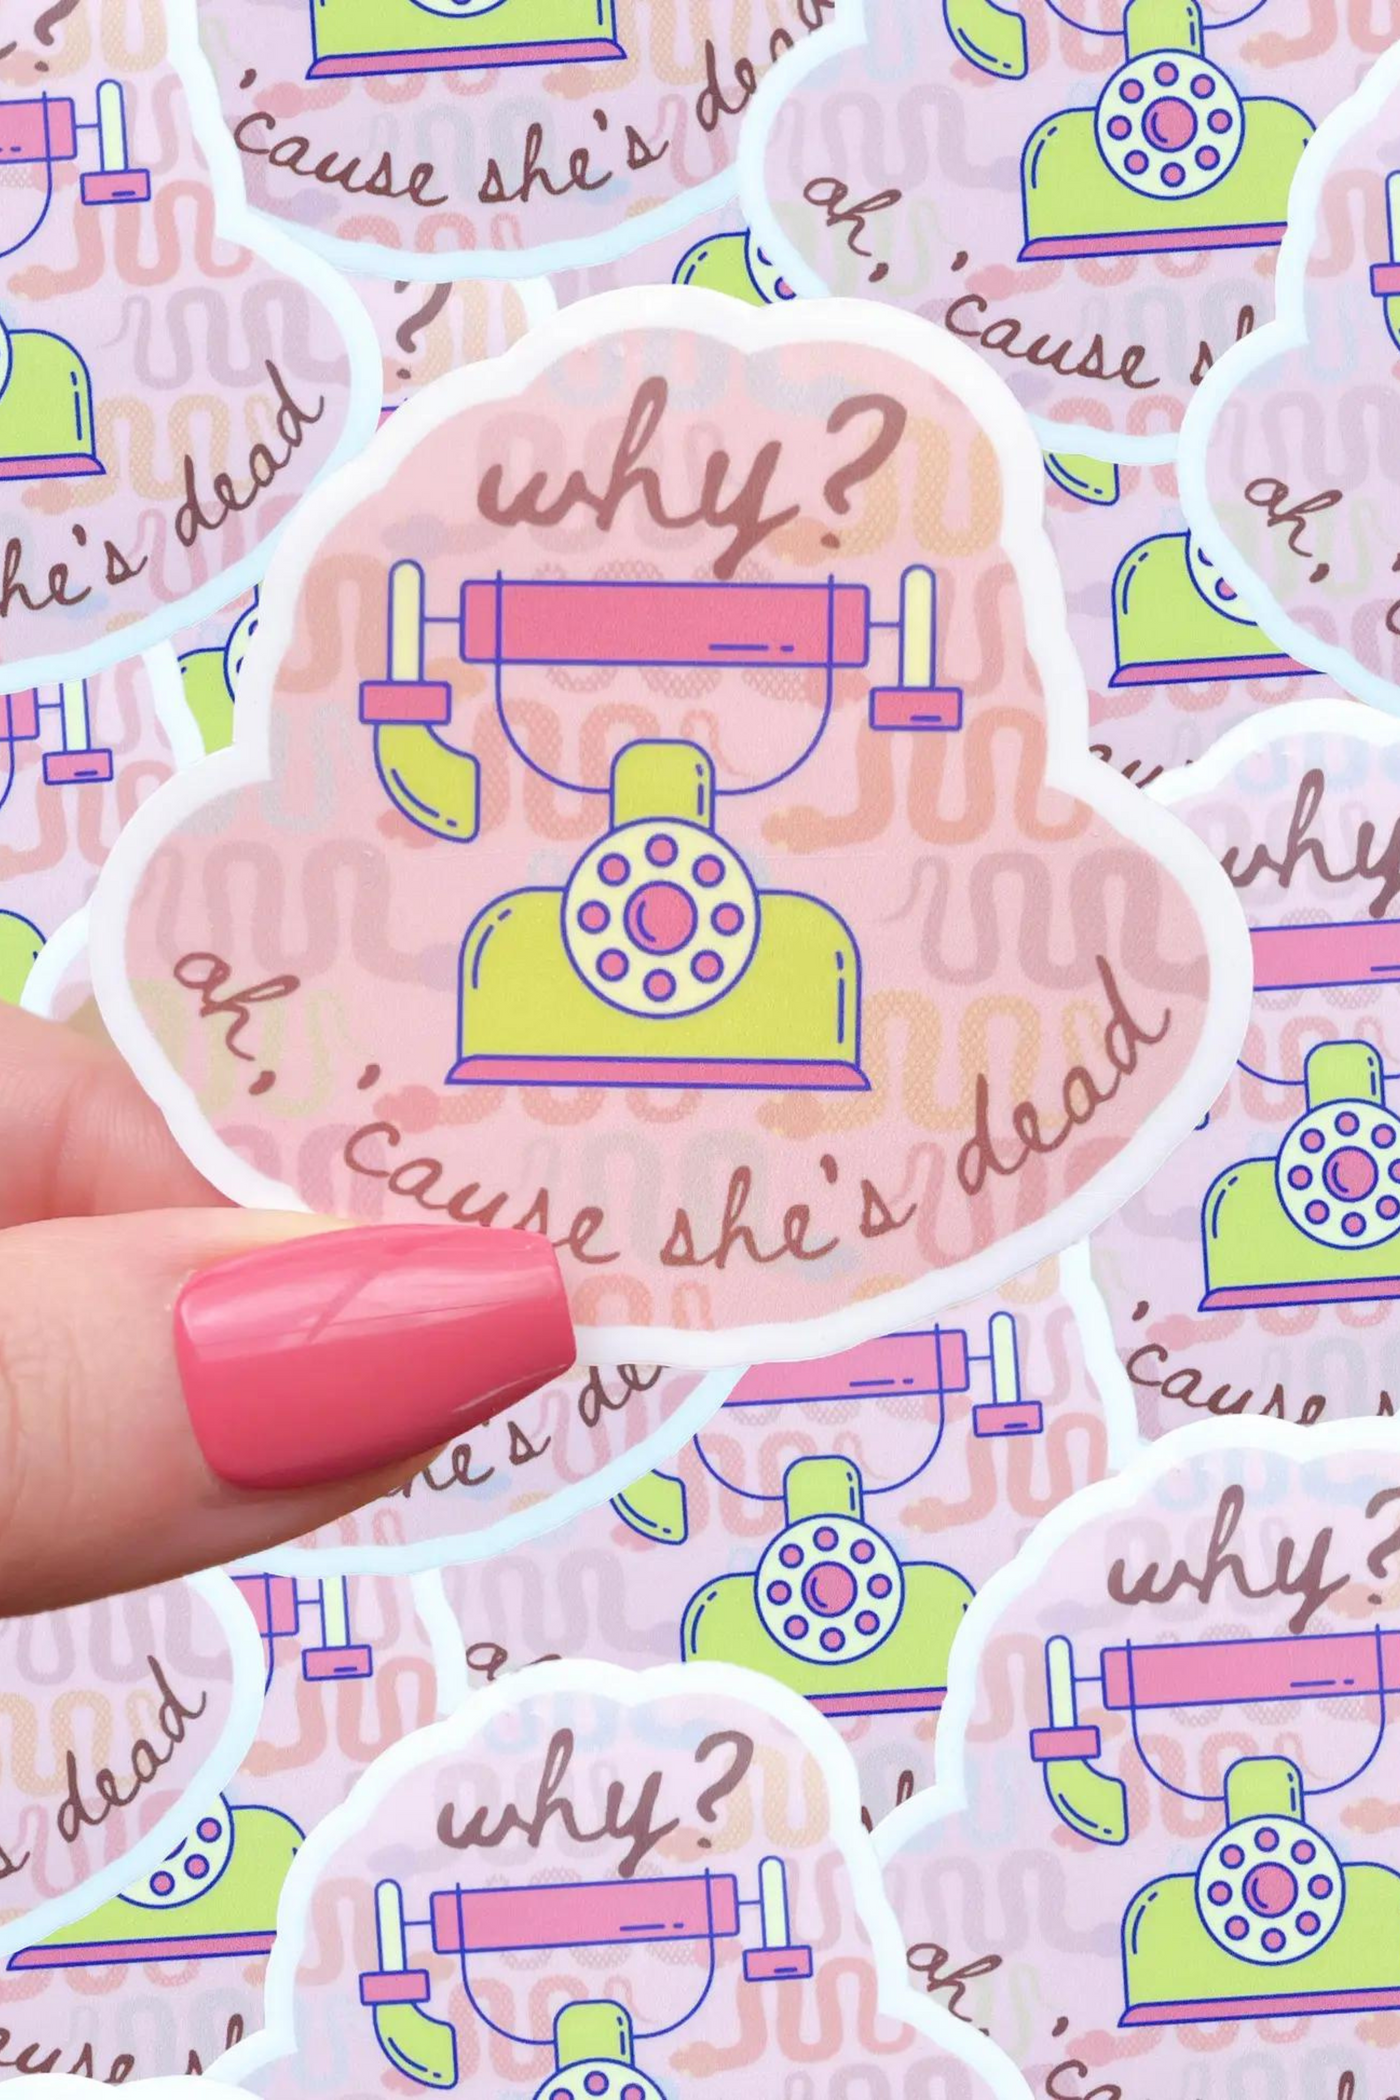 Why? Taylor Sticker